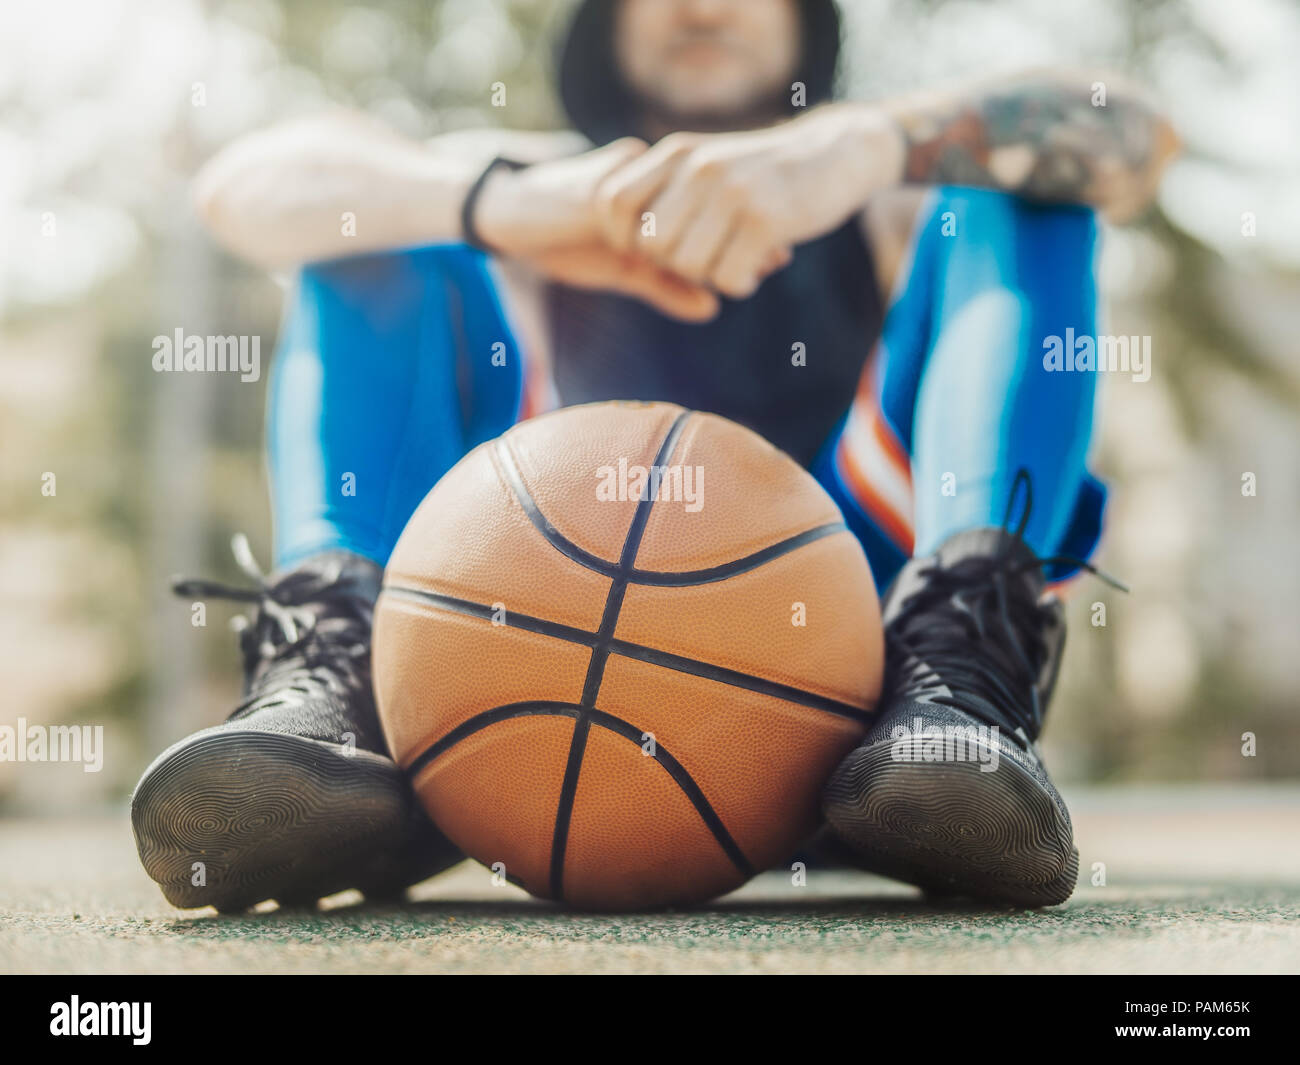 Close up of attractive man sitting on the court. Ball is on focus and foreground, man is on background and blurred. Stock Photo